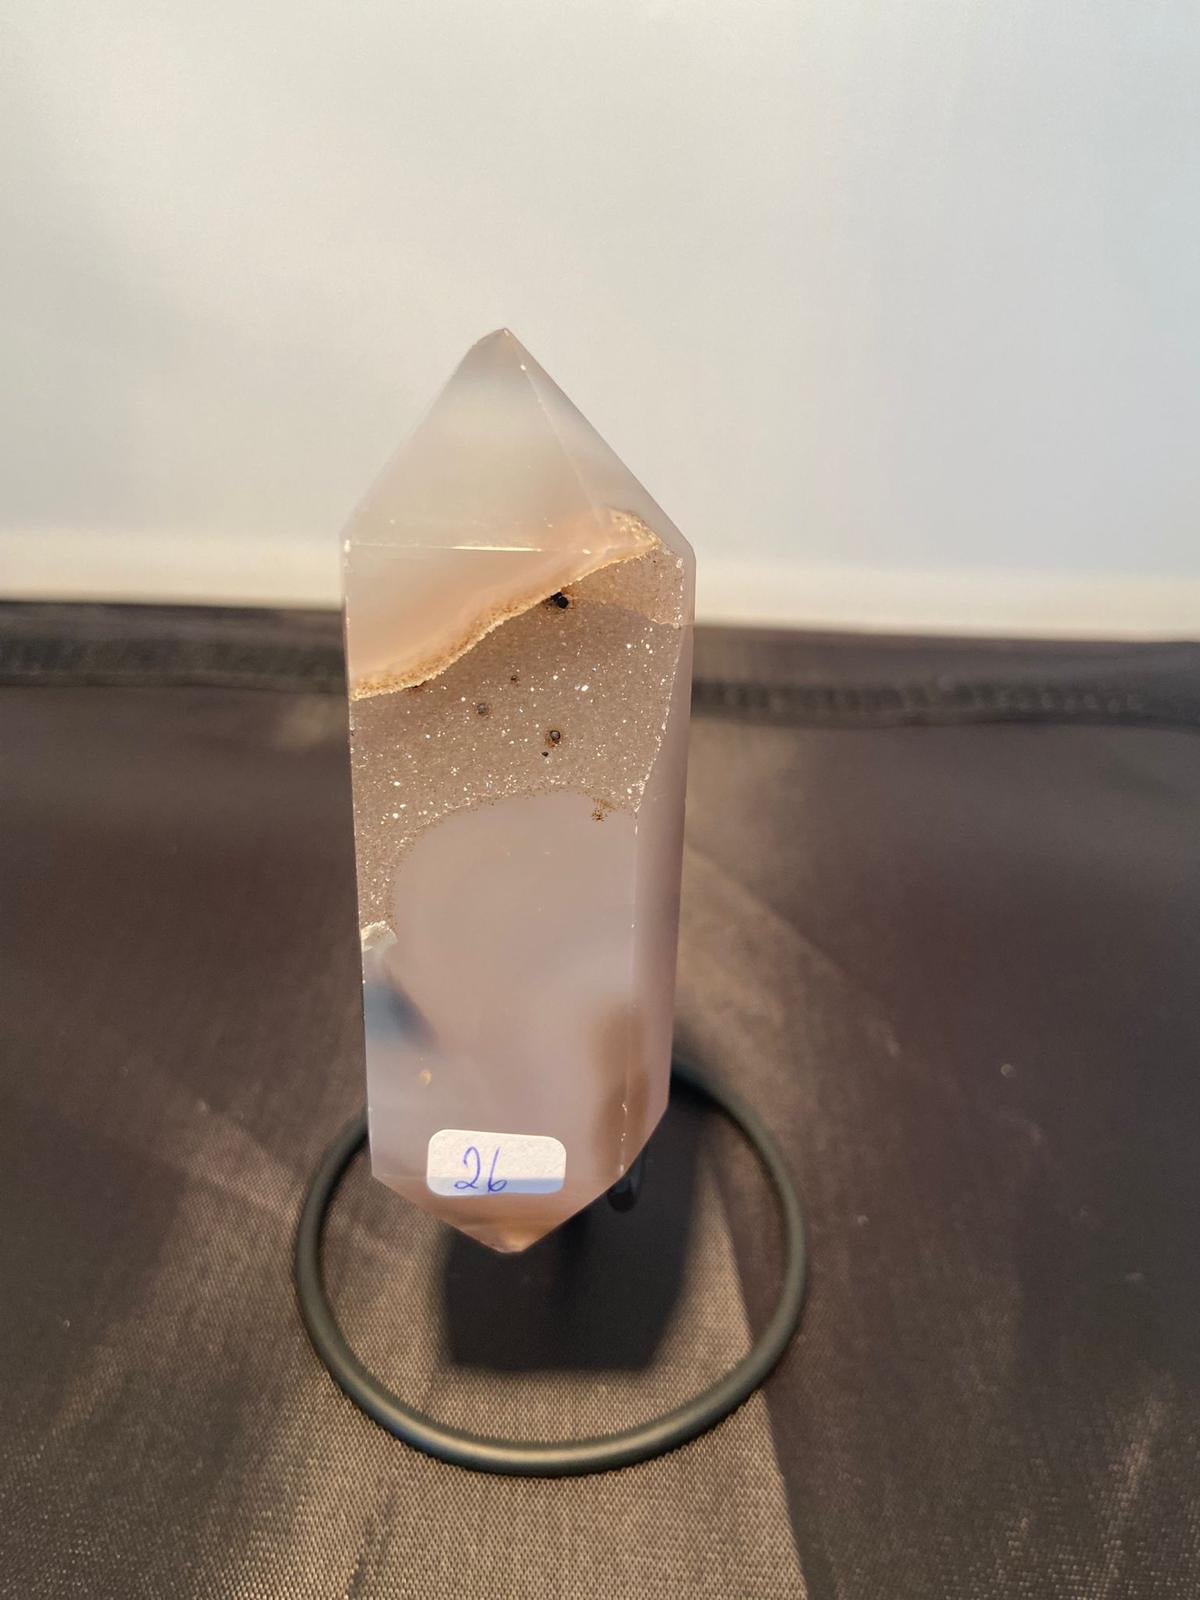 Druzy Agate Double Terminated Points on stand